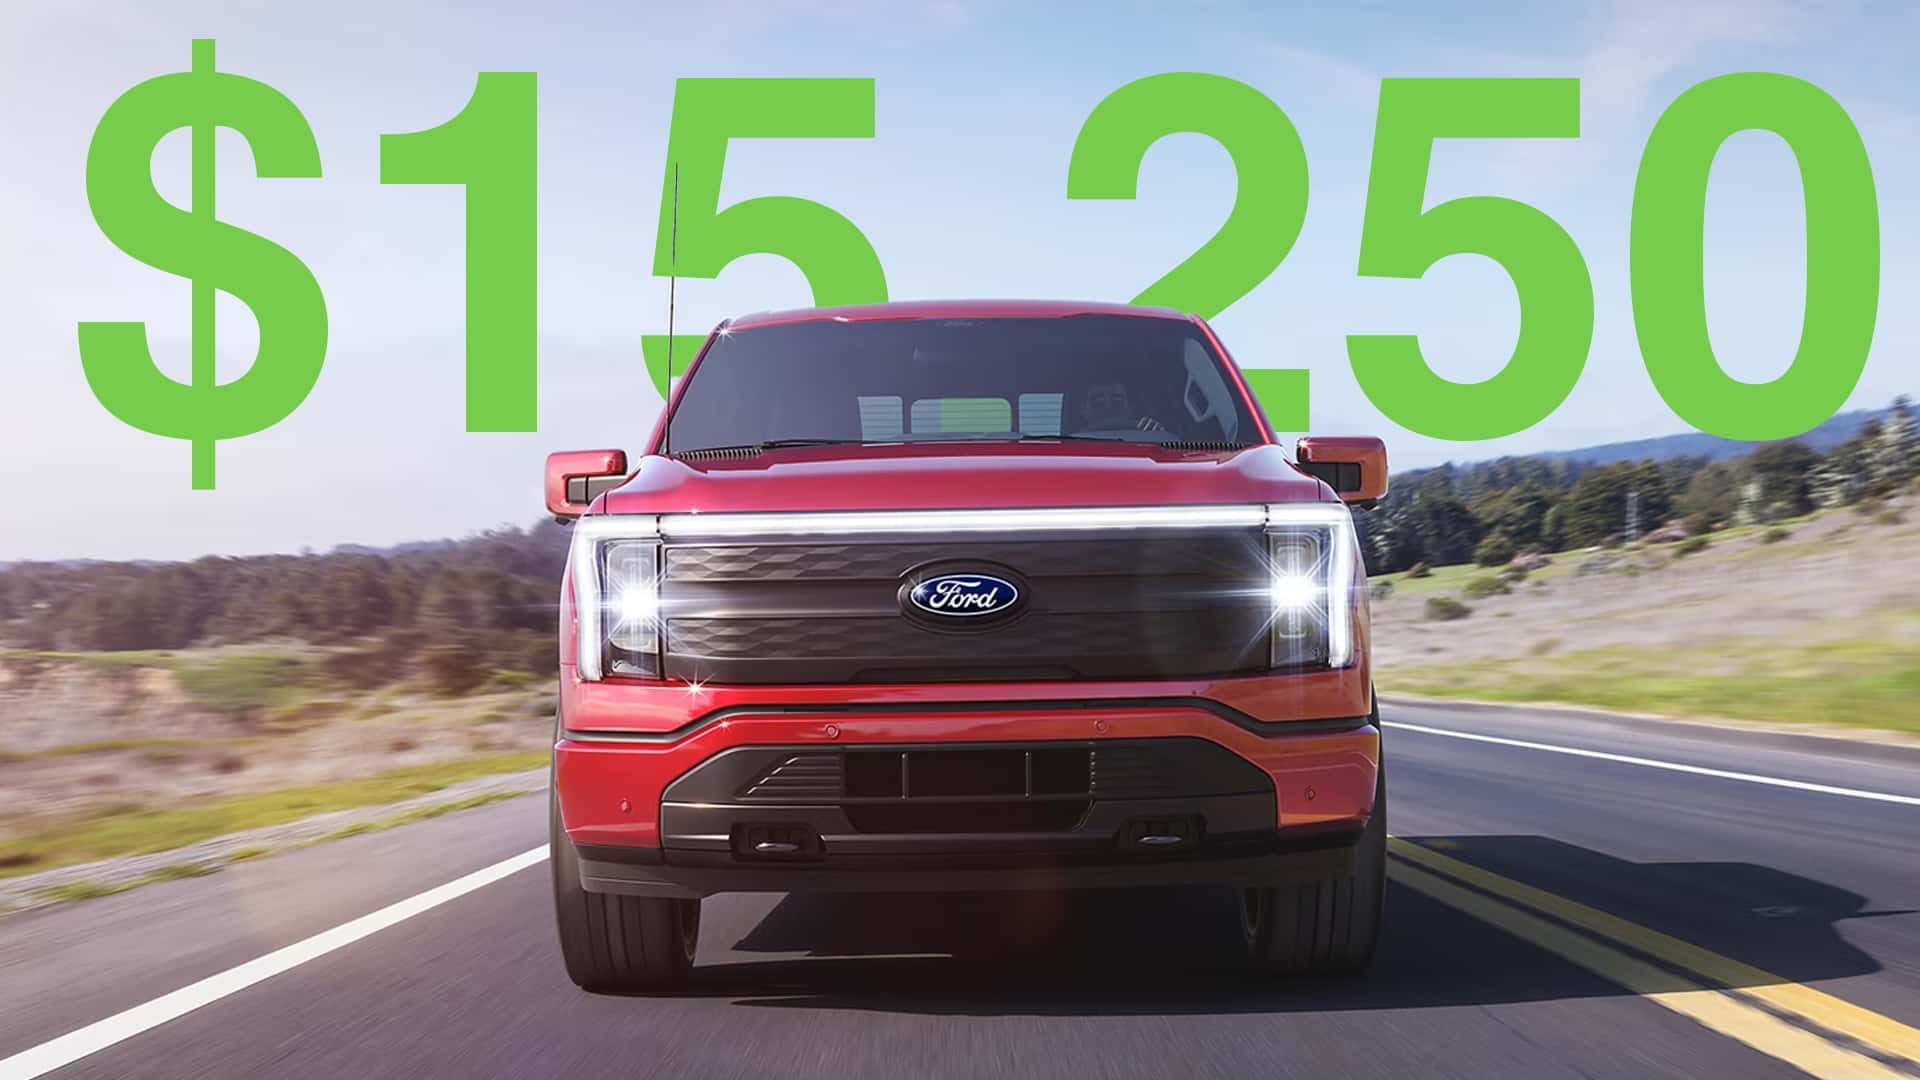 This Amazing Ford F-150 Lightning Lease Deal Can Get You Up To $15,250 Off